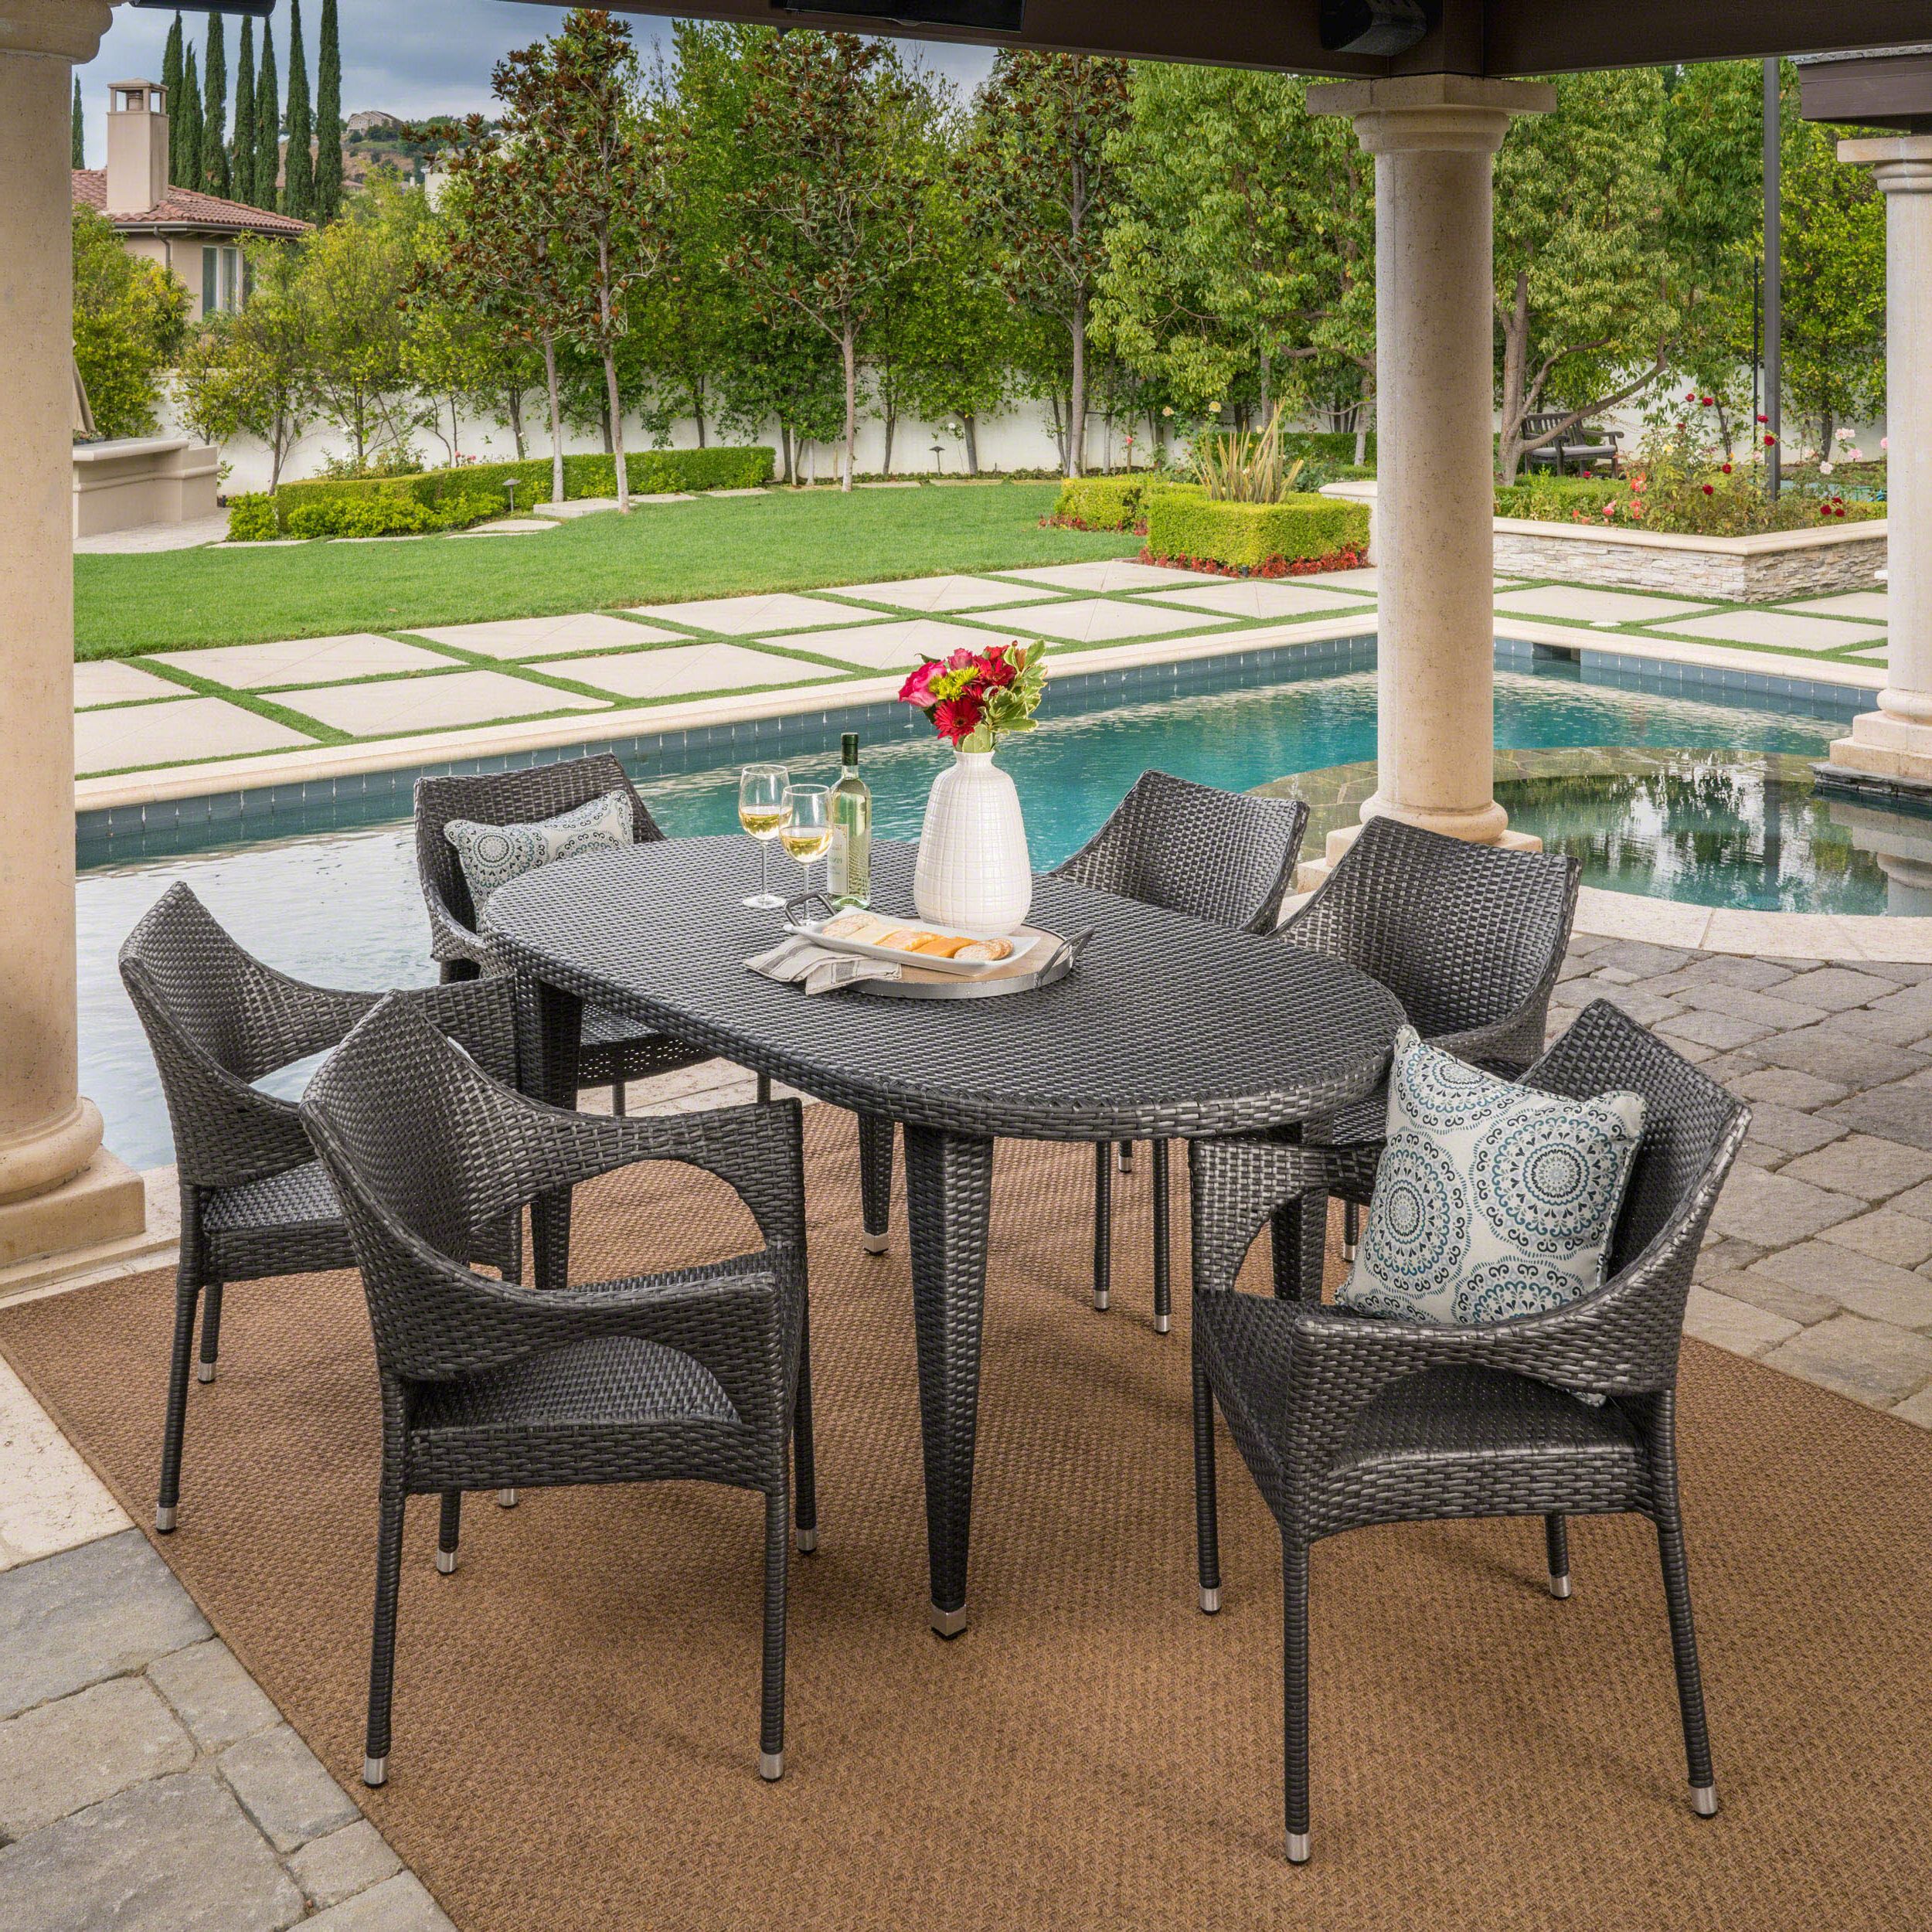 2020 Oval 7 Piece Outdoor Patio Dining Sets Intended For Analia Outdoor 7 Piece Wicker Oval Dining Set With Stacking Chairs (View 1 of 15)